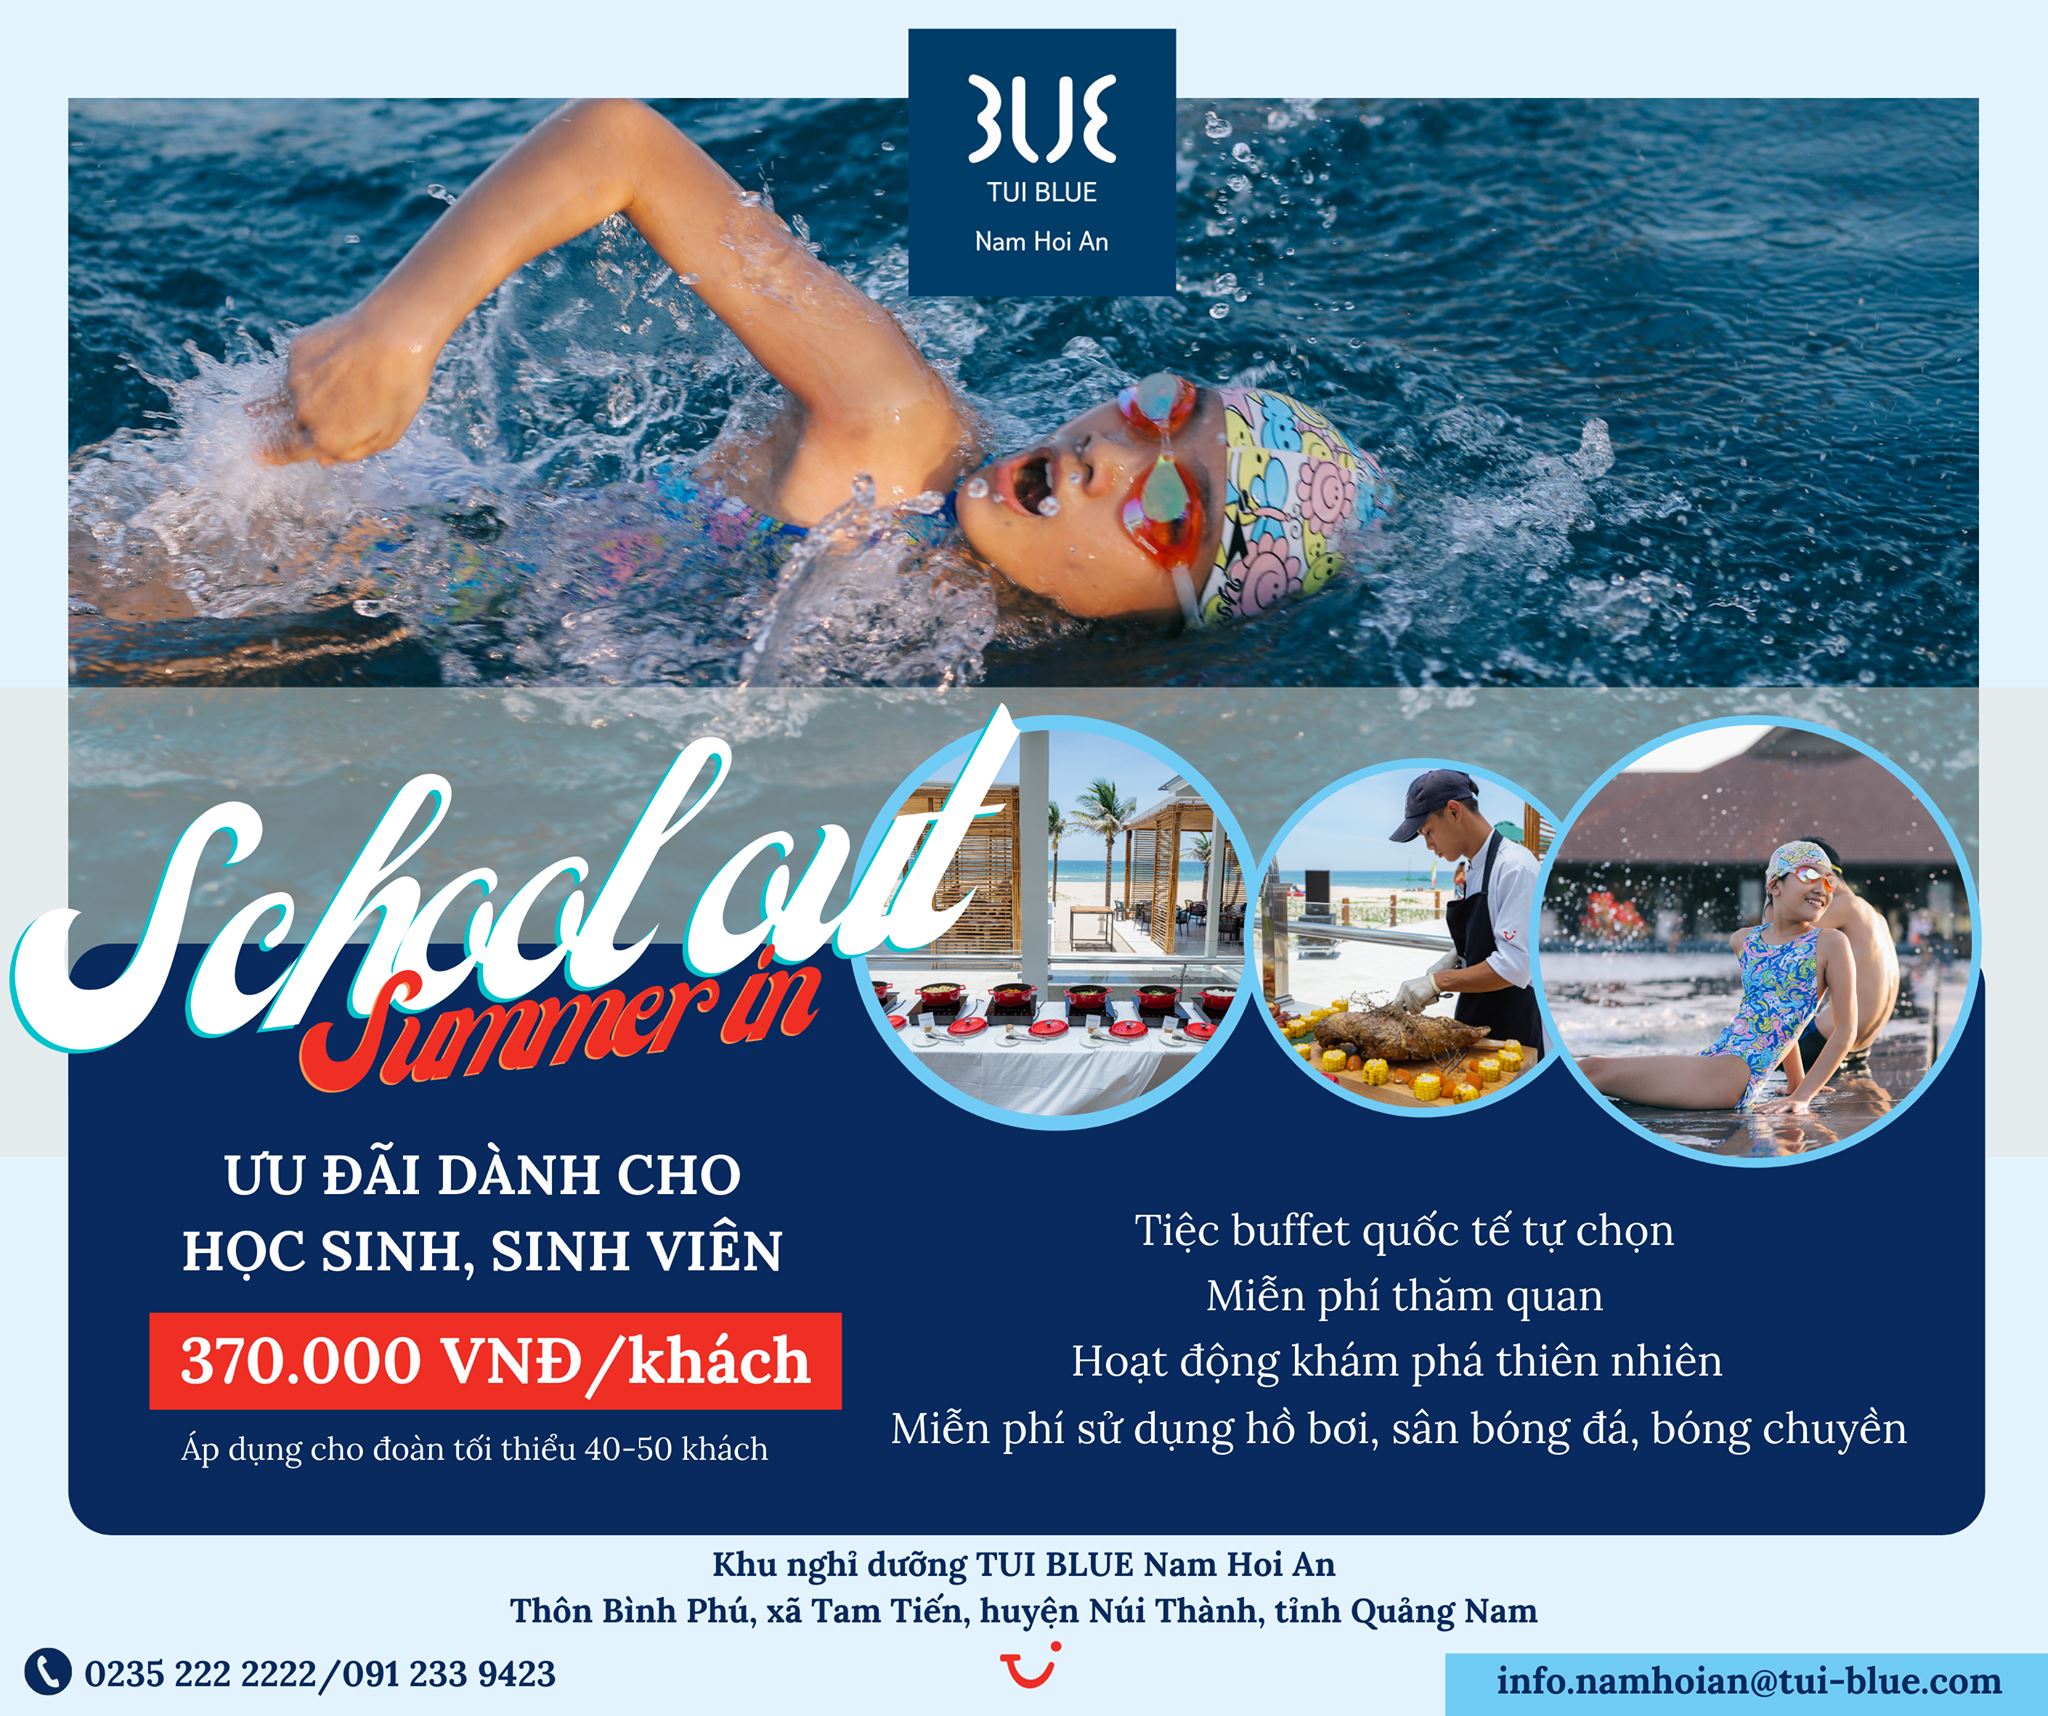 TUI BLUE Nam Hoi An school out summer in